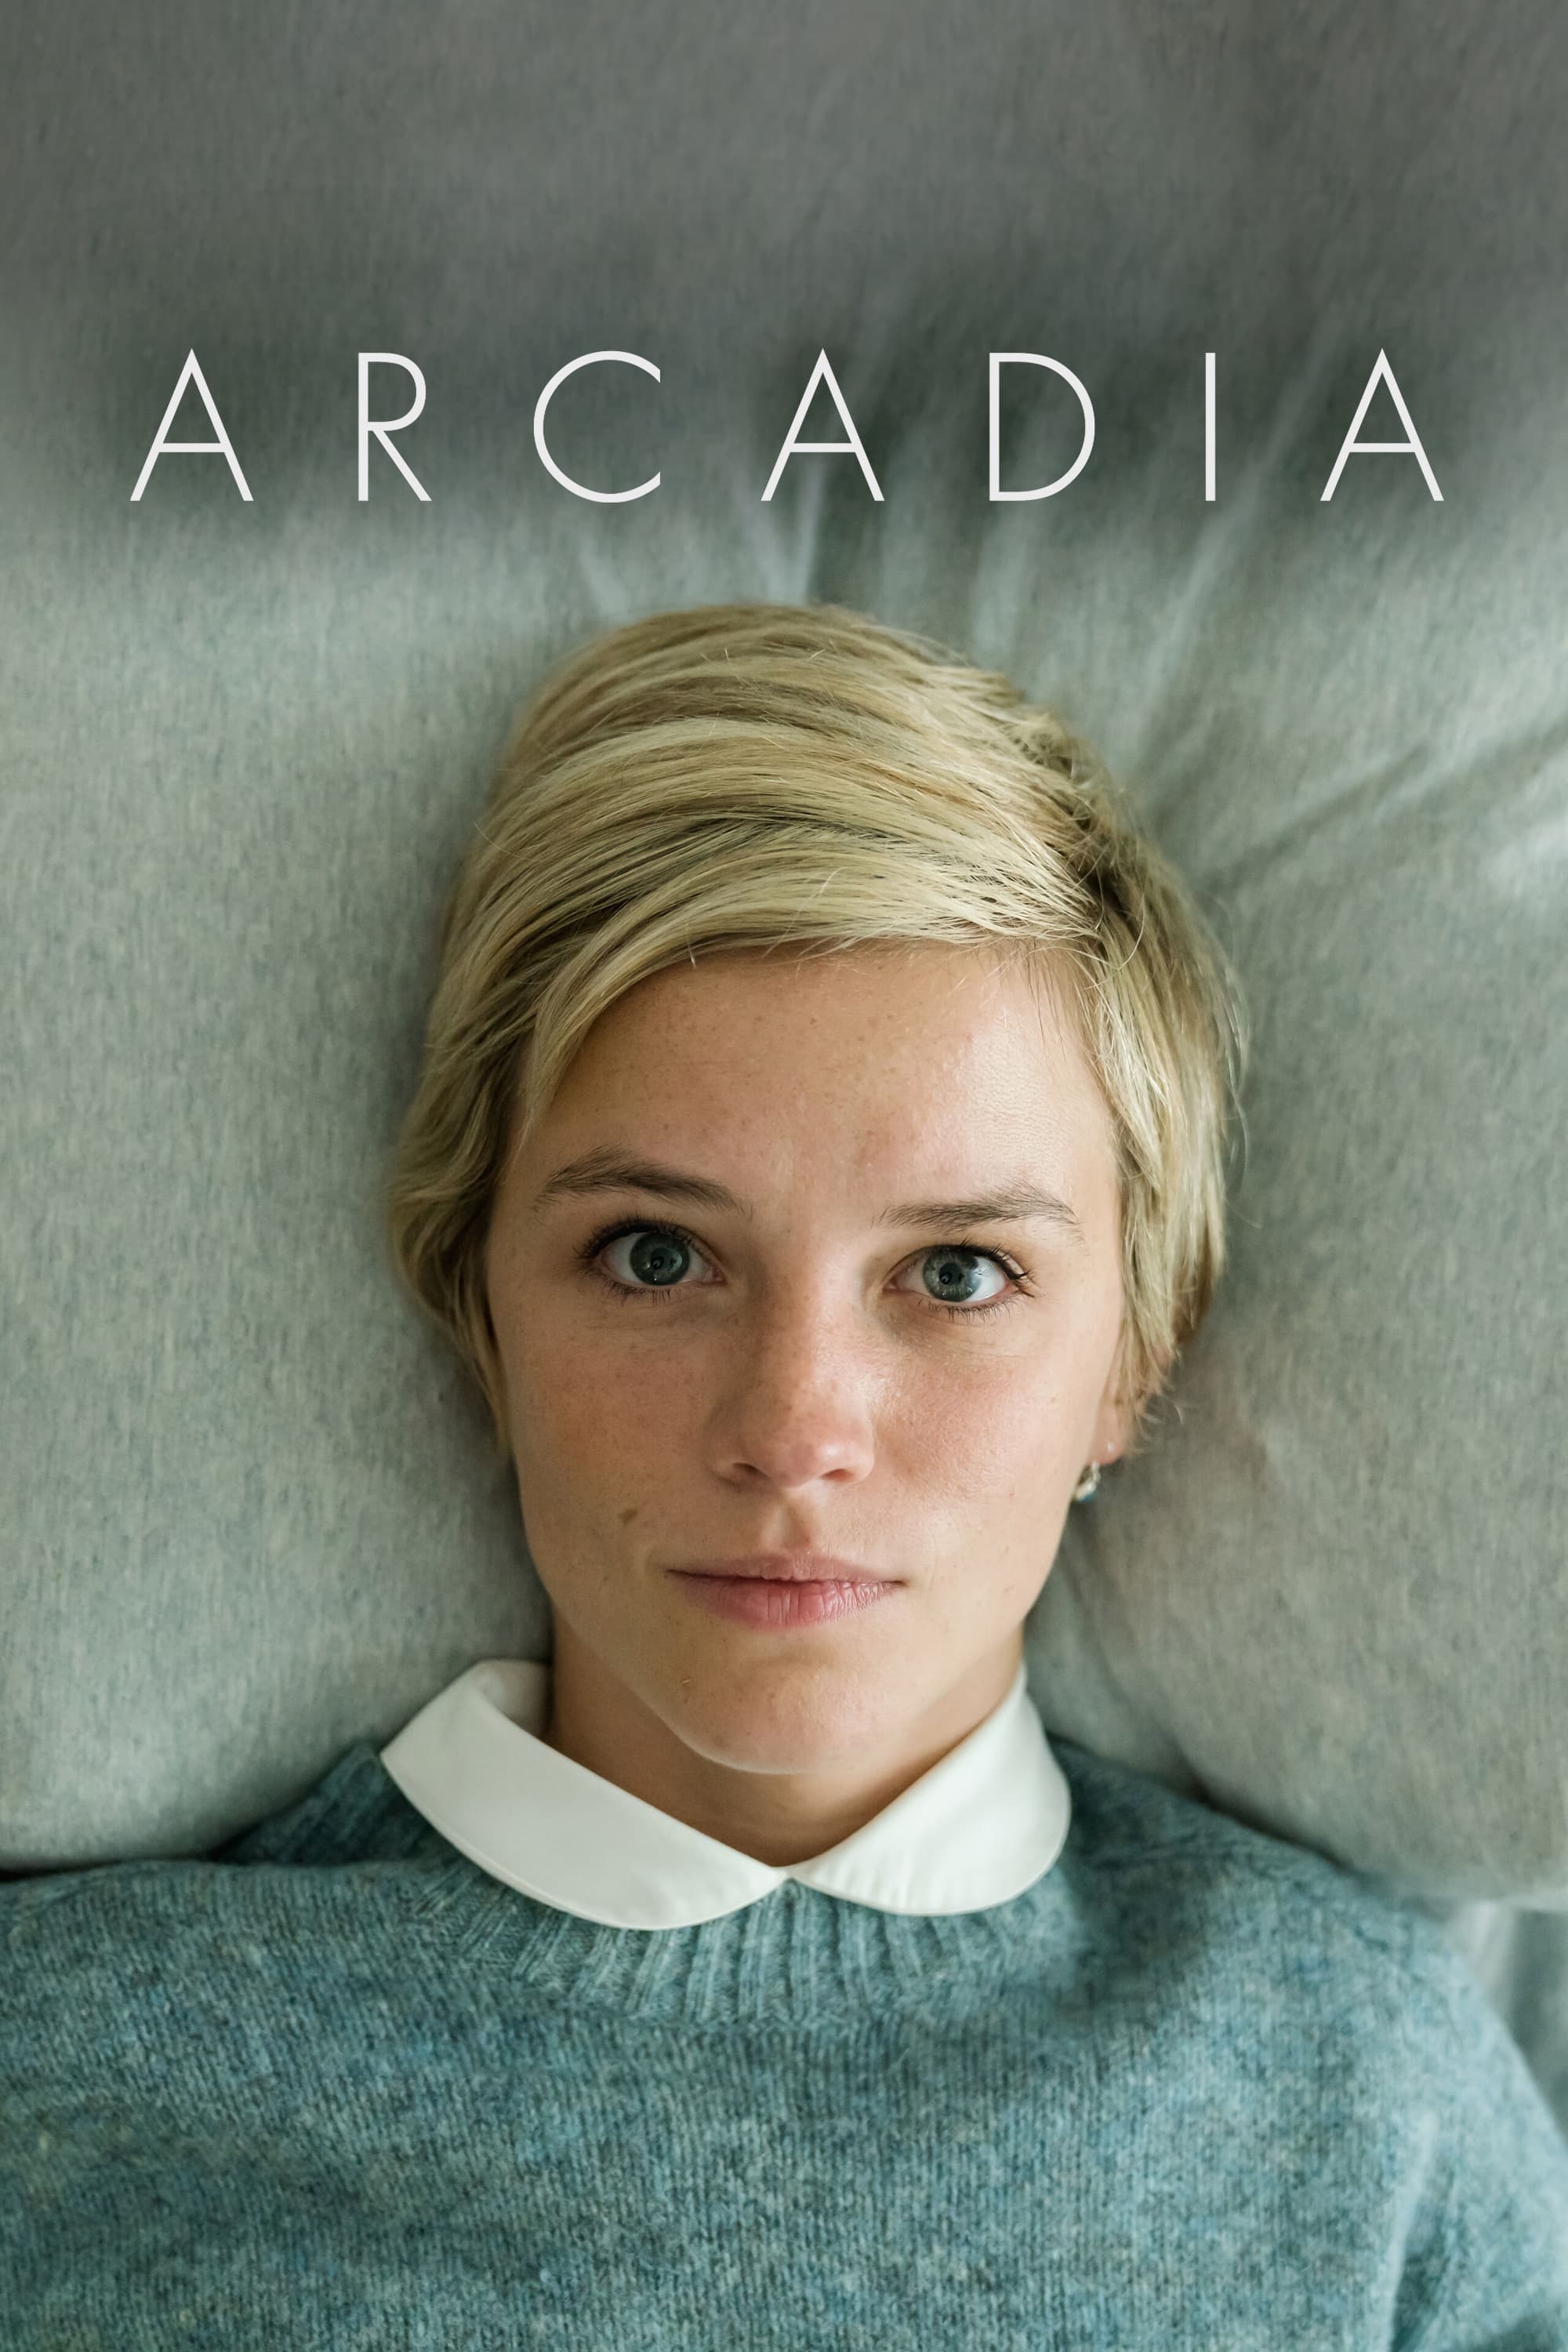 Arcadia TV Shows About Dystopia